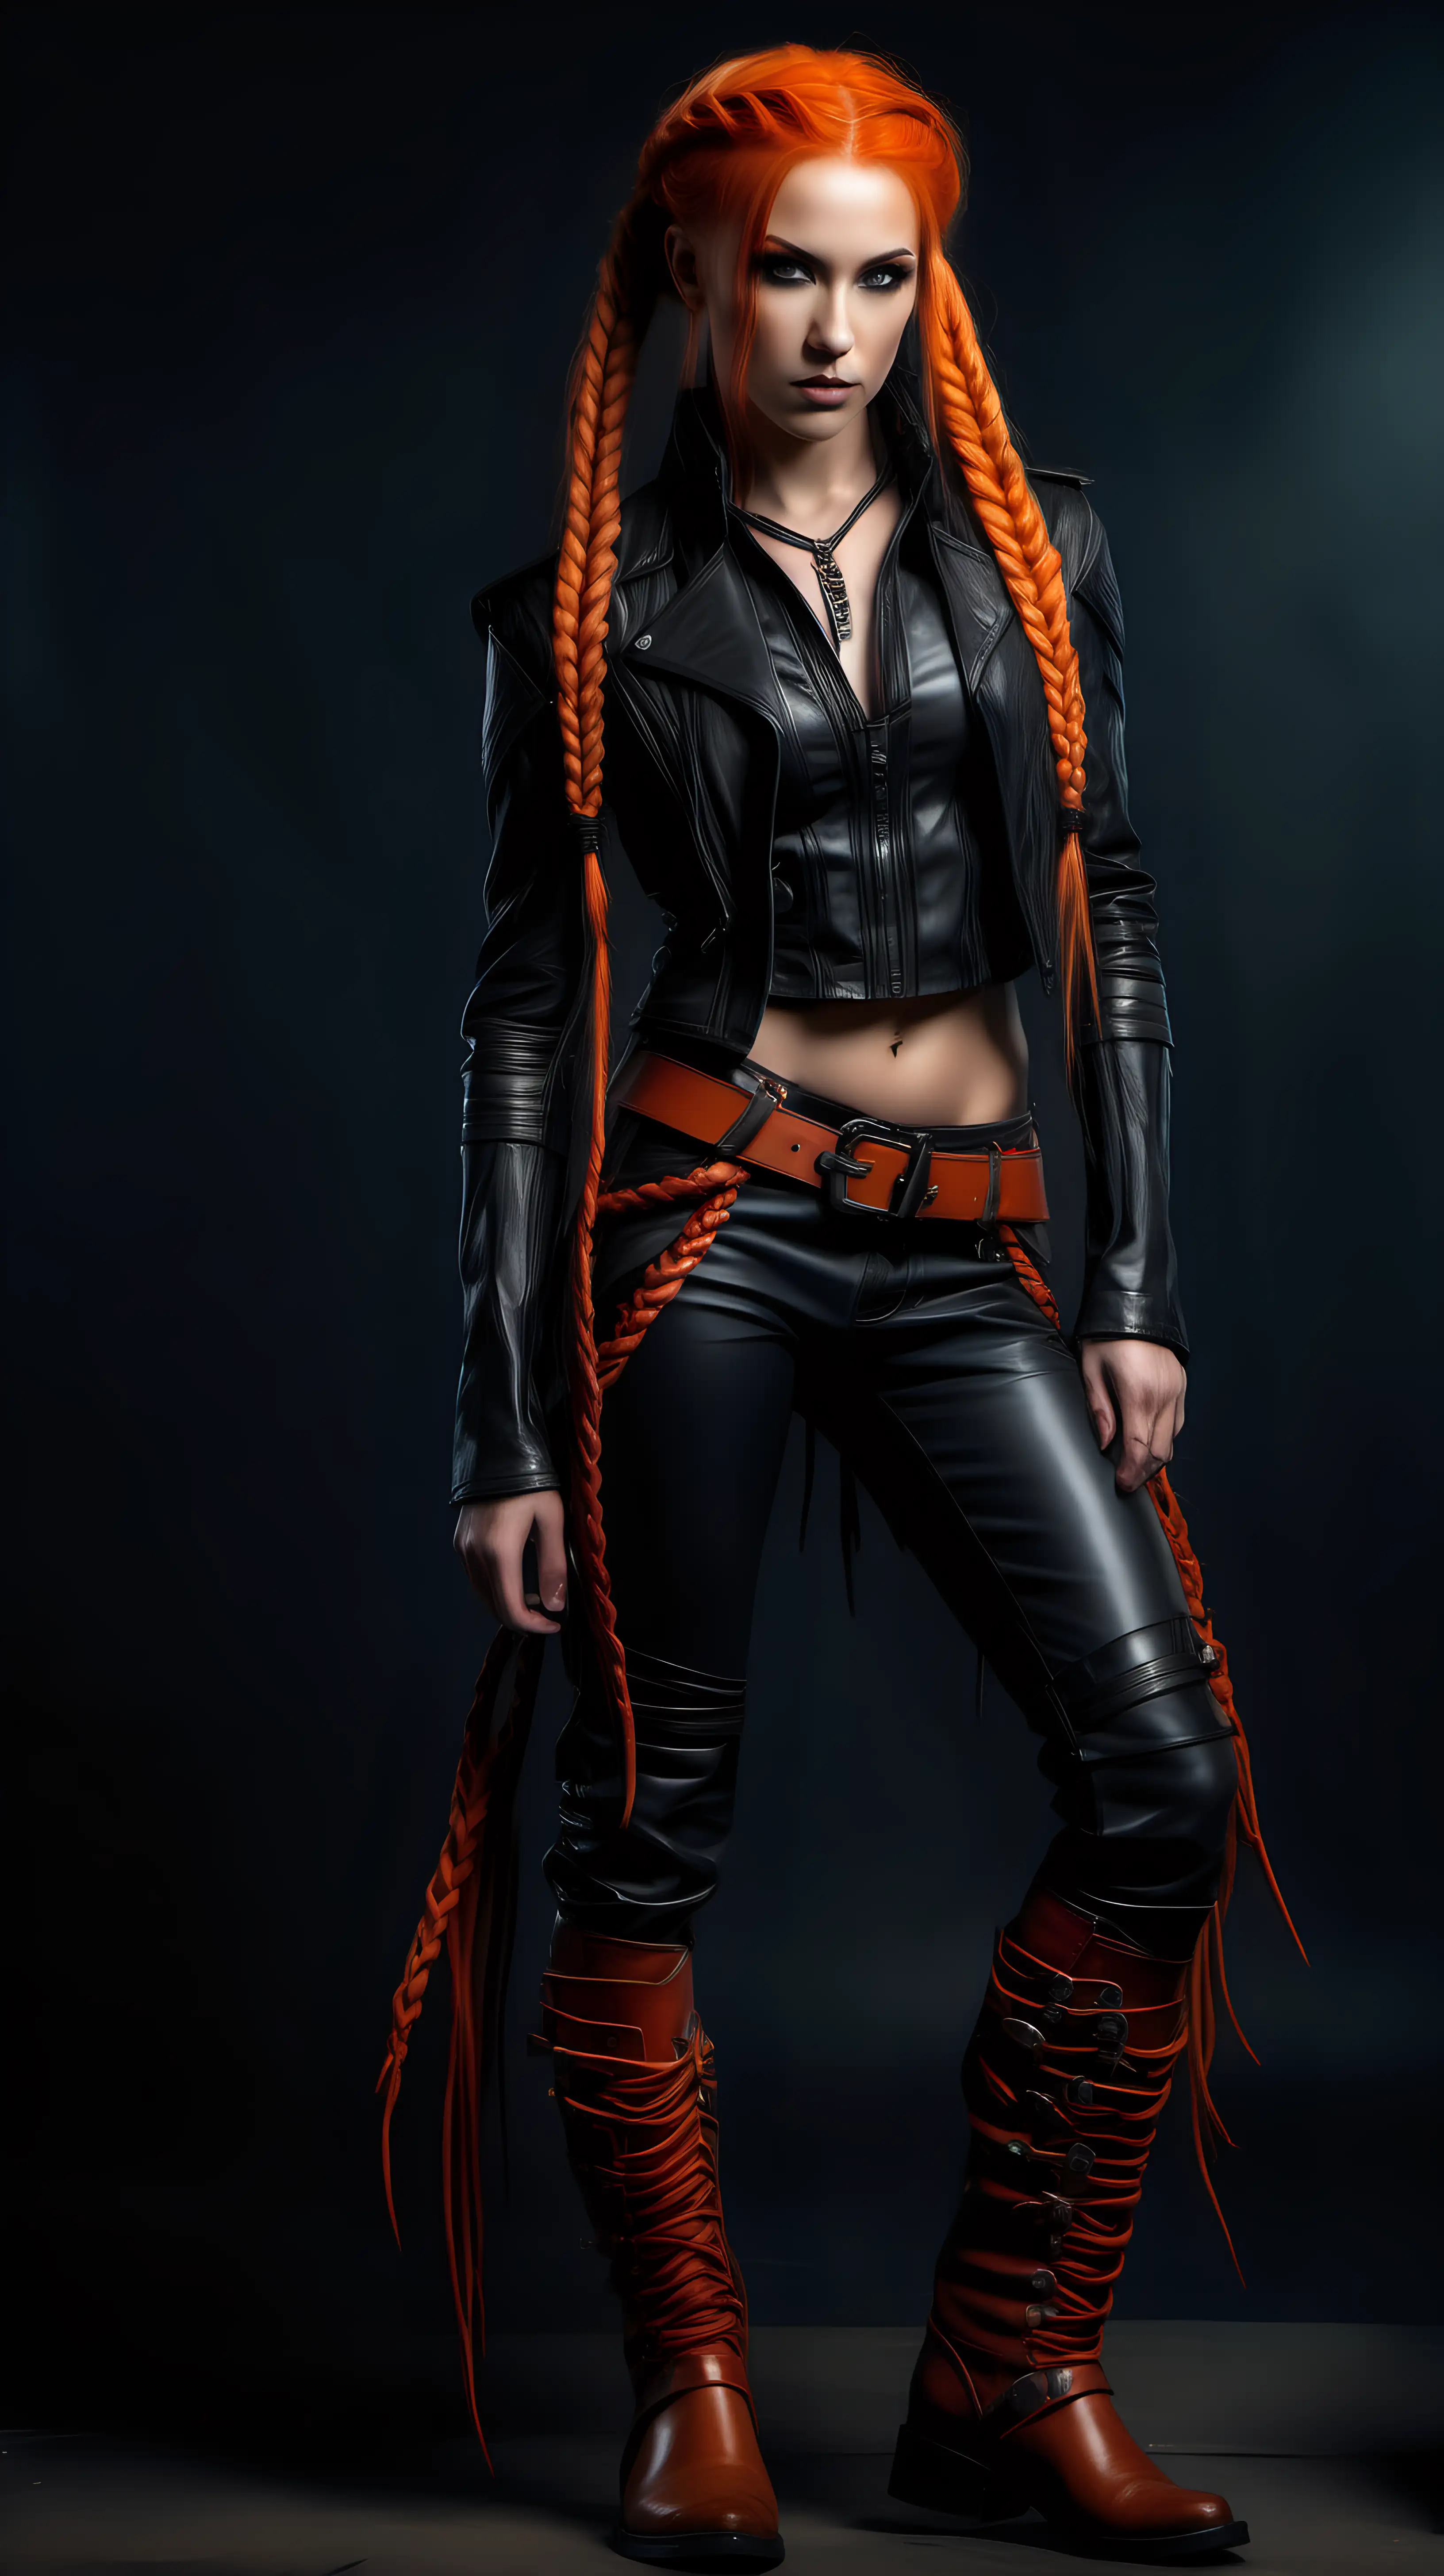 Fantasy Rogue with Orange Braided Hair in Muscular Leather Attire